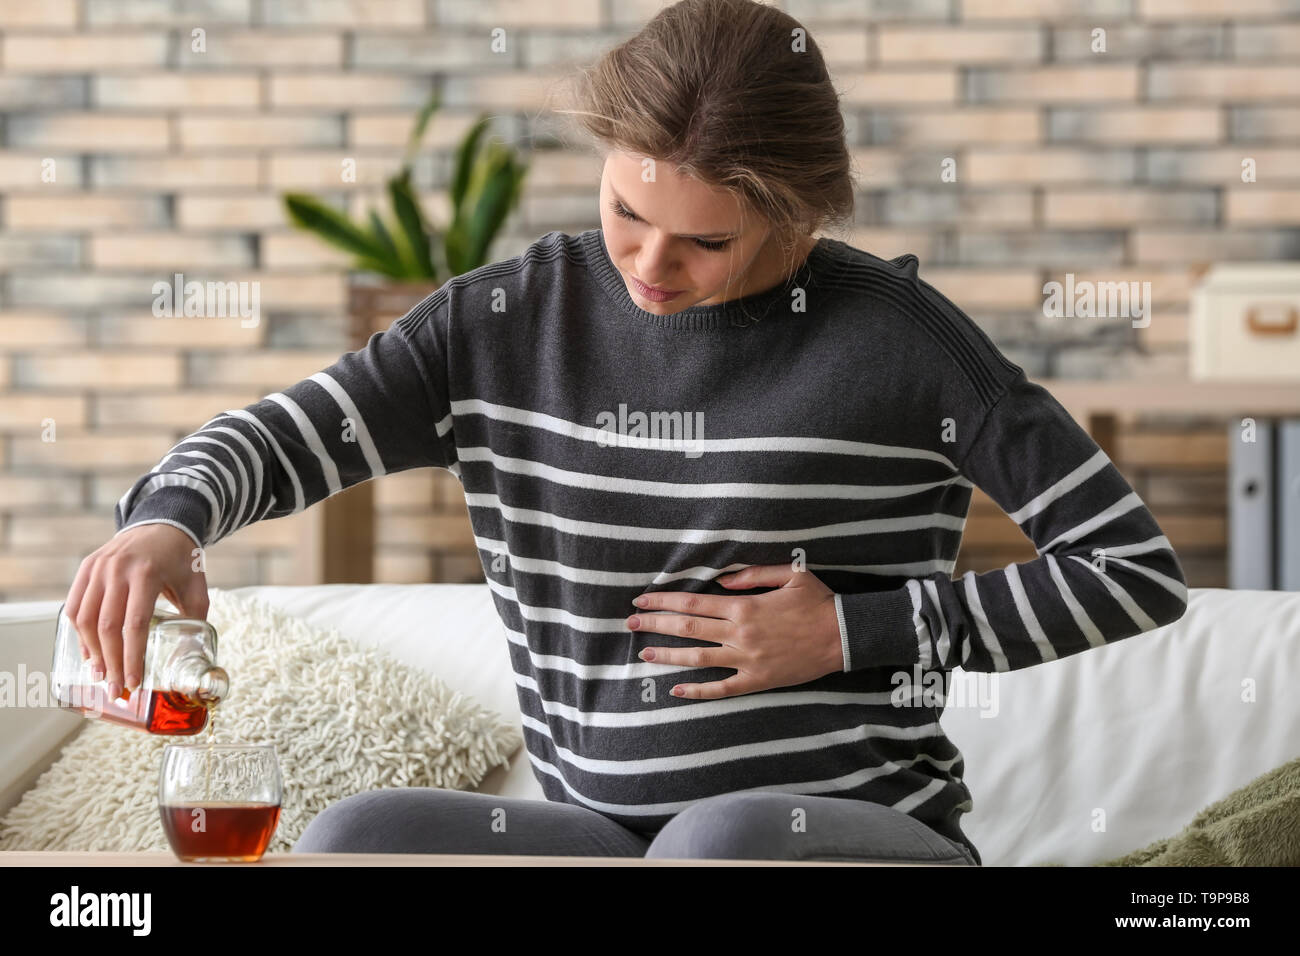 Pregnant woman drinking alcohol at home Stock Photo